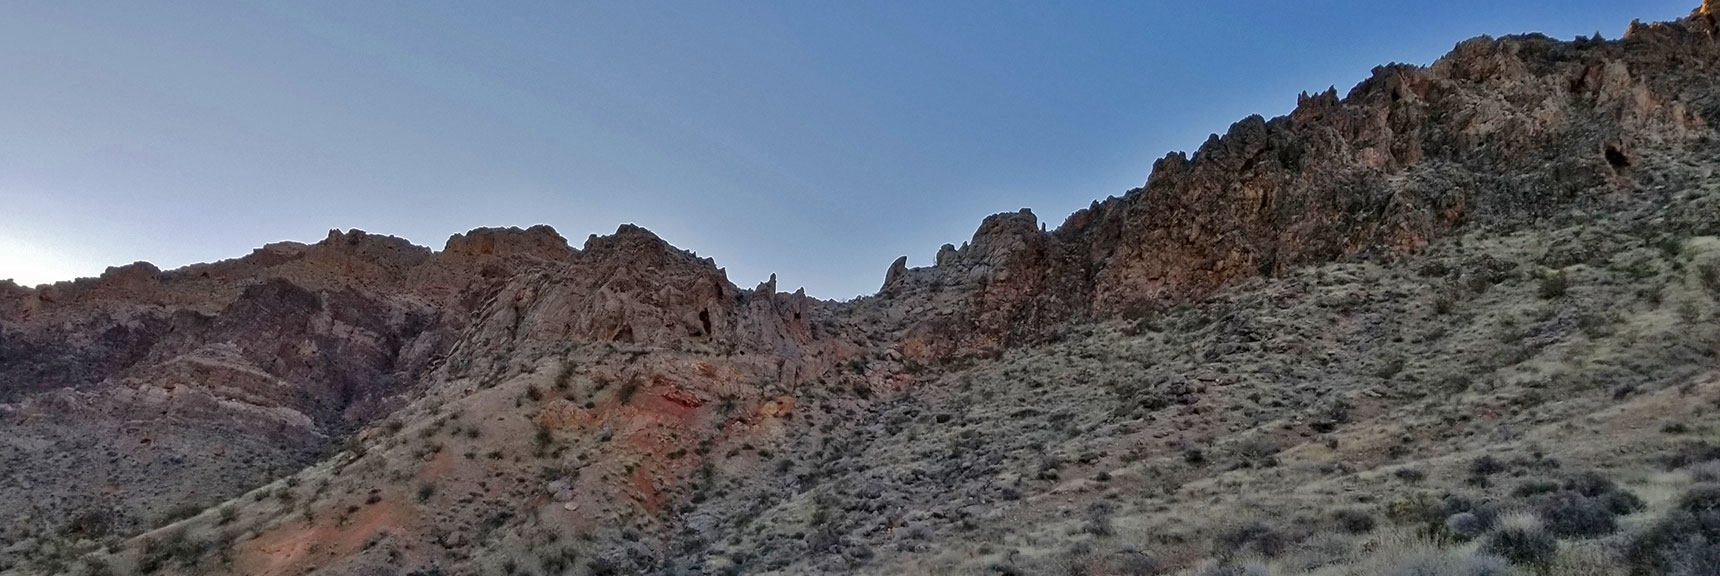 The Pass Above Old Arrowhead Trailhead, Entering Into the Muddy Mountains Wilderness, Nevada